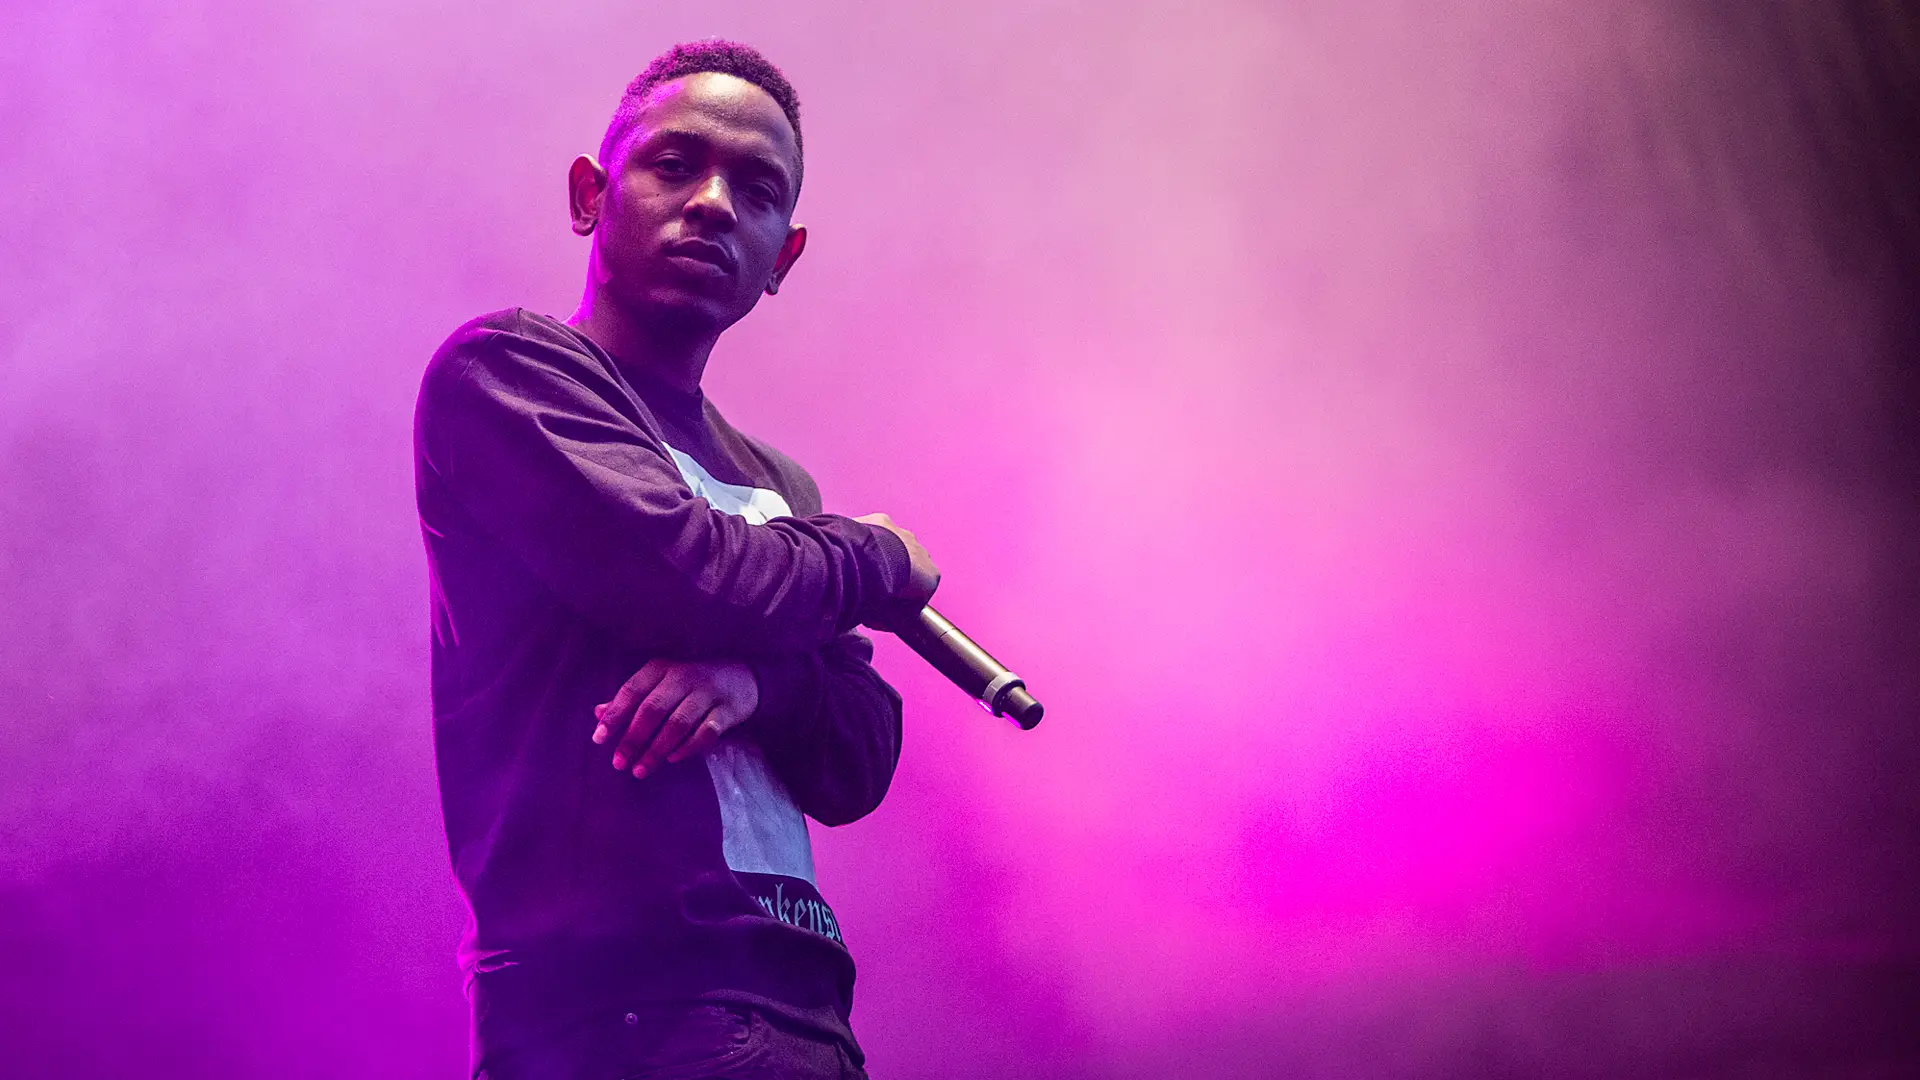 38 Kendrick Lamar Quotes About Love, Life & More